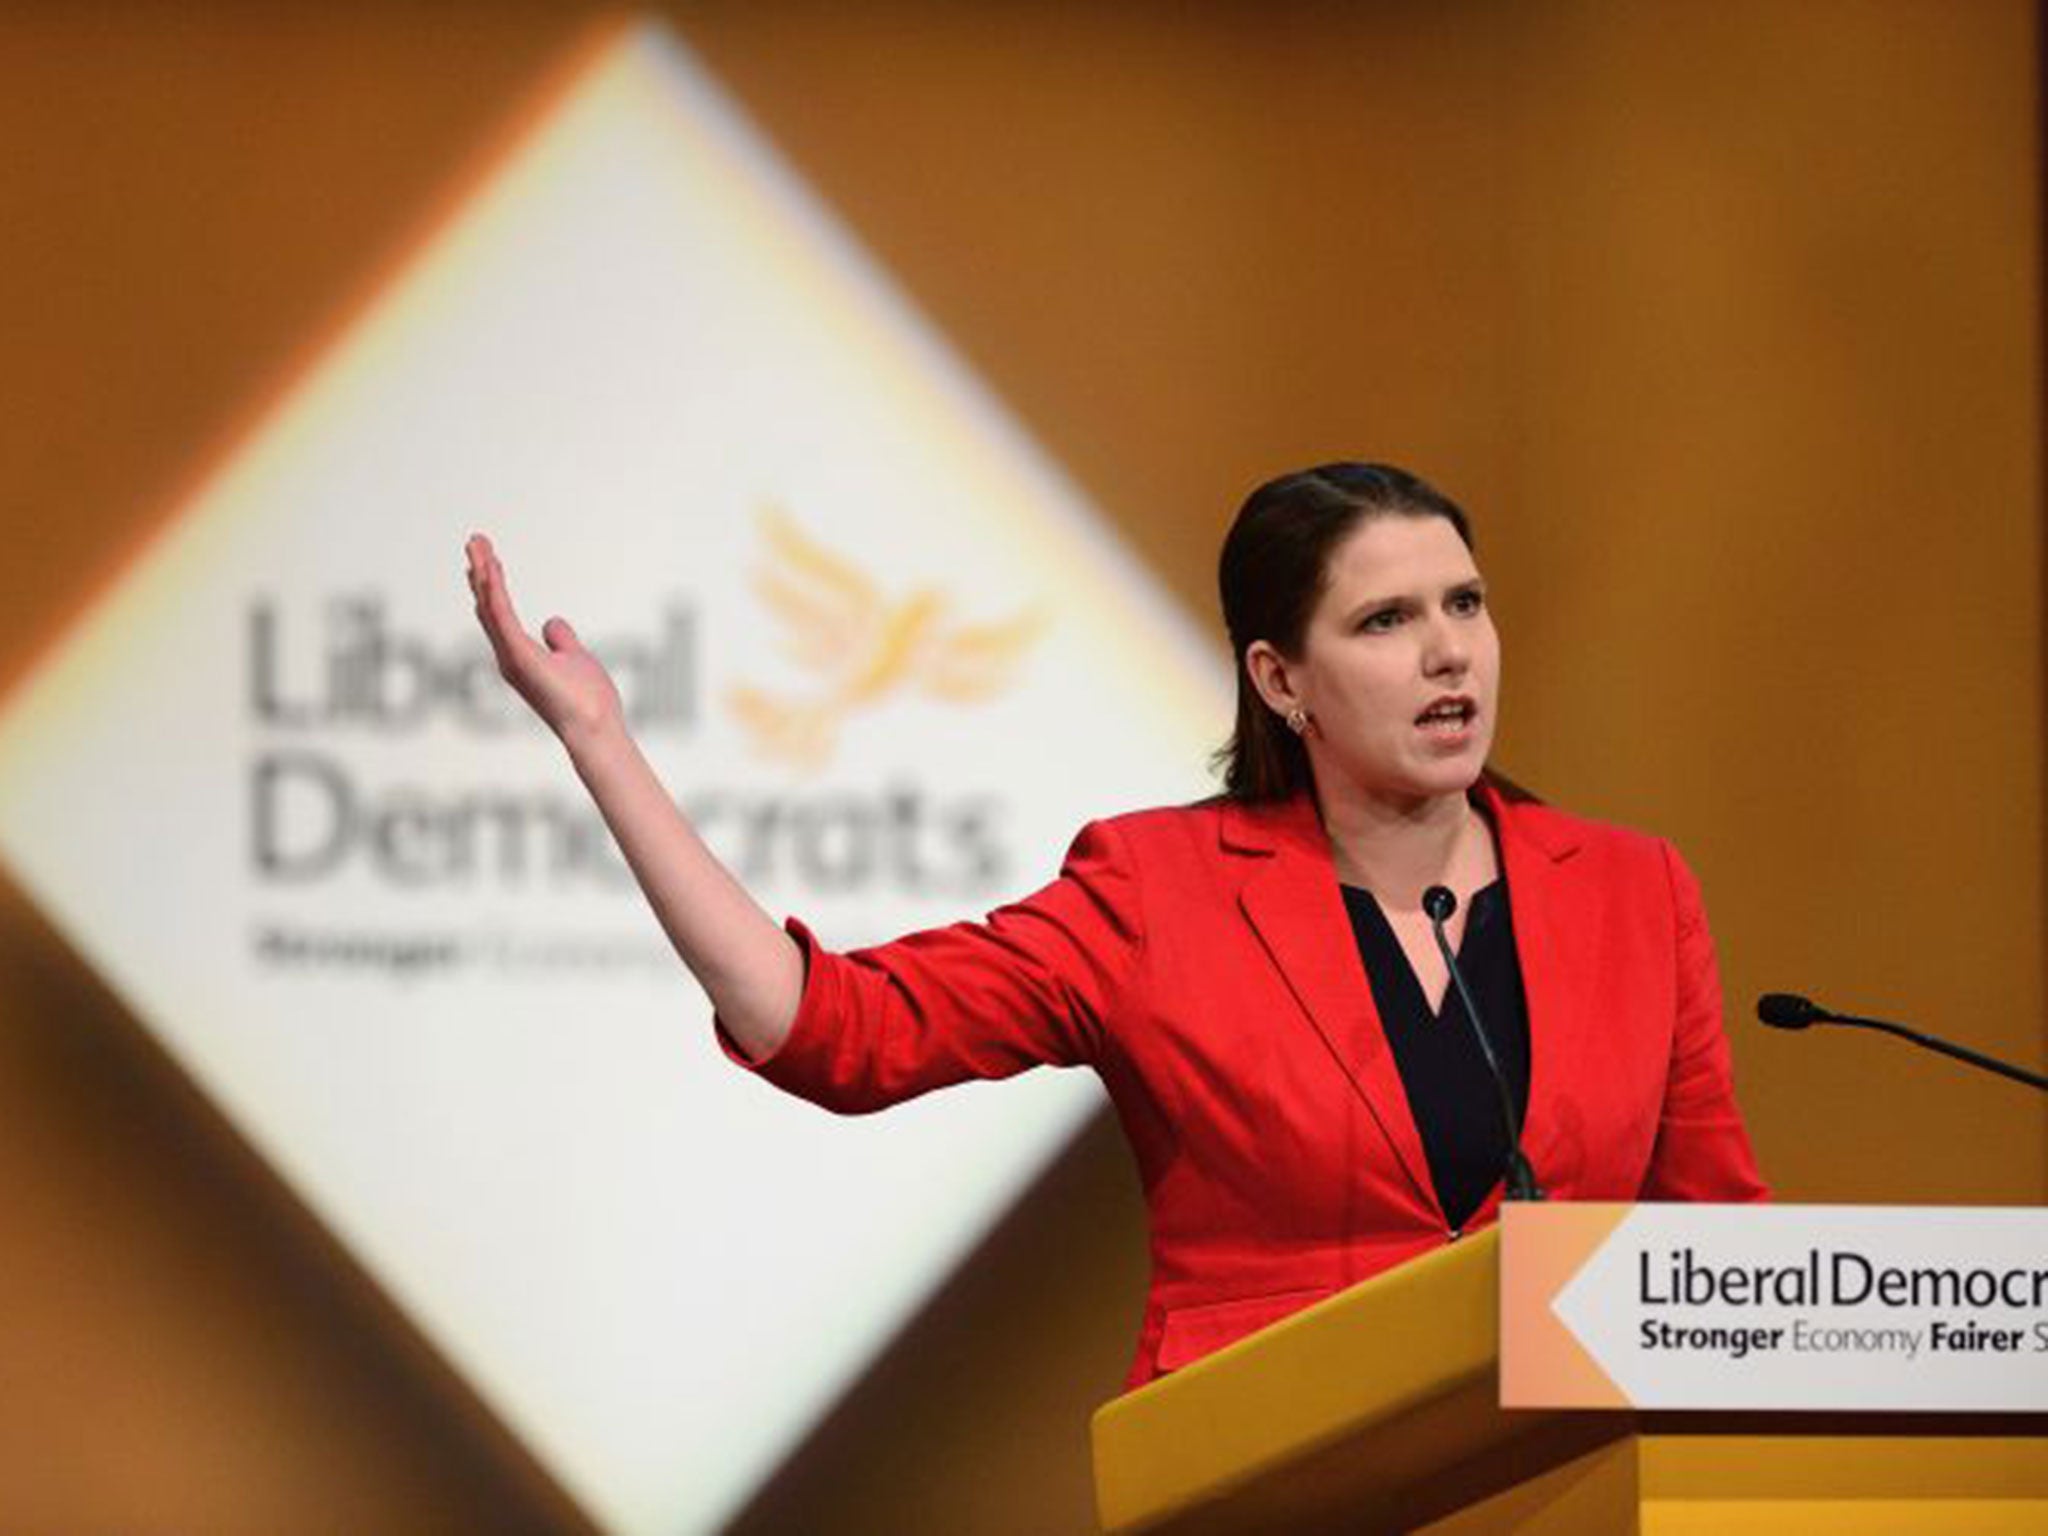 Jo Swinson, MP for East Dunbartonshire, addresses the Liberal Democrat Autumn conference on Monday